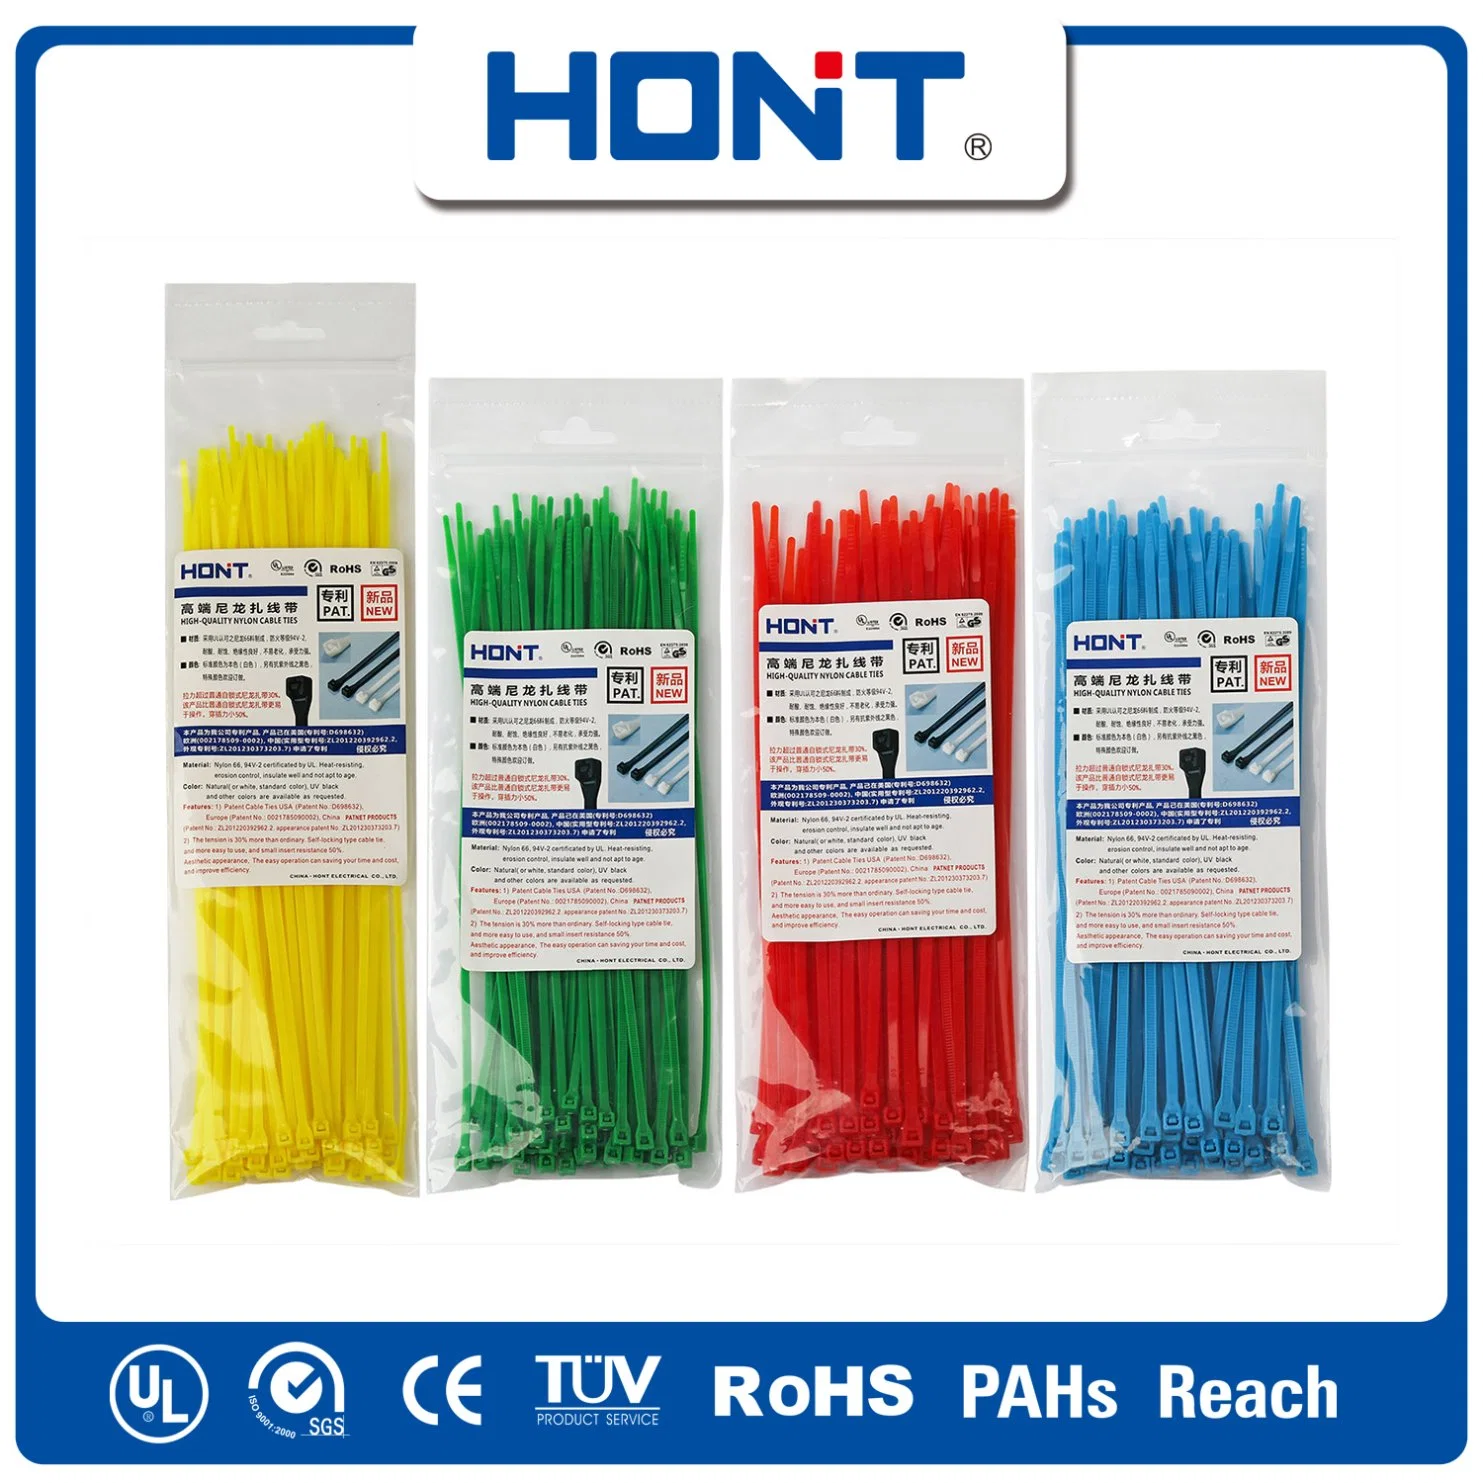 CE Approved 94V2 Hont Plastic Bag + Sticker Exporting Carton/Tray Releasable Ties Cable Accessories